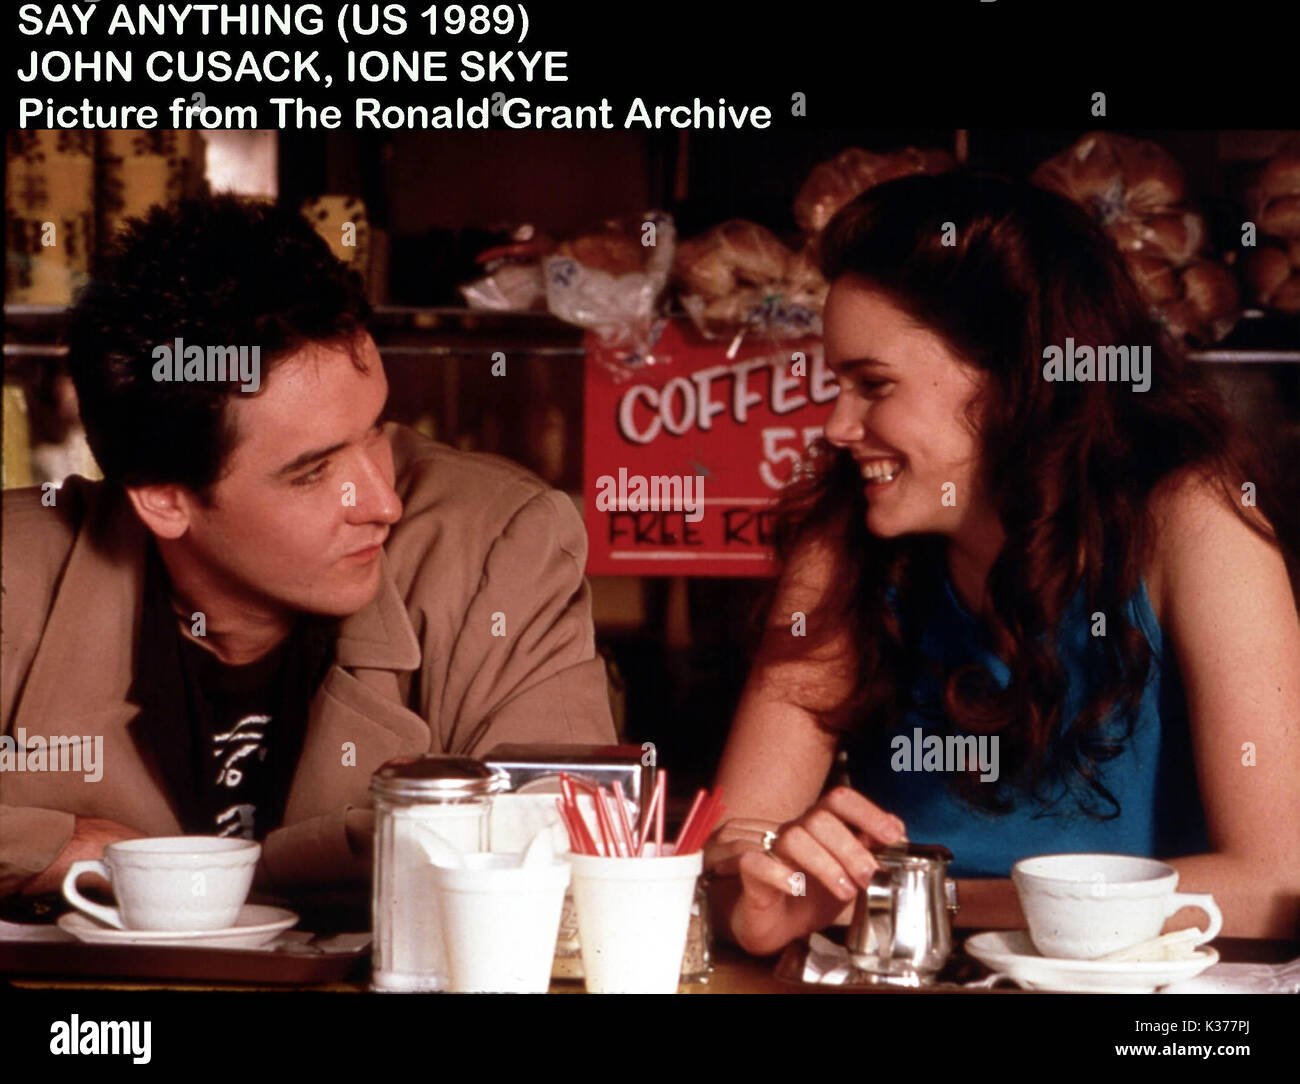 SAY ANYTHING JOHN CUSACK, IONE SKYE     Date: 1989 Stock Photo